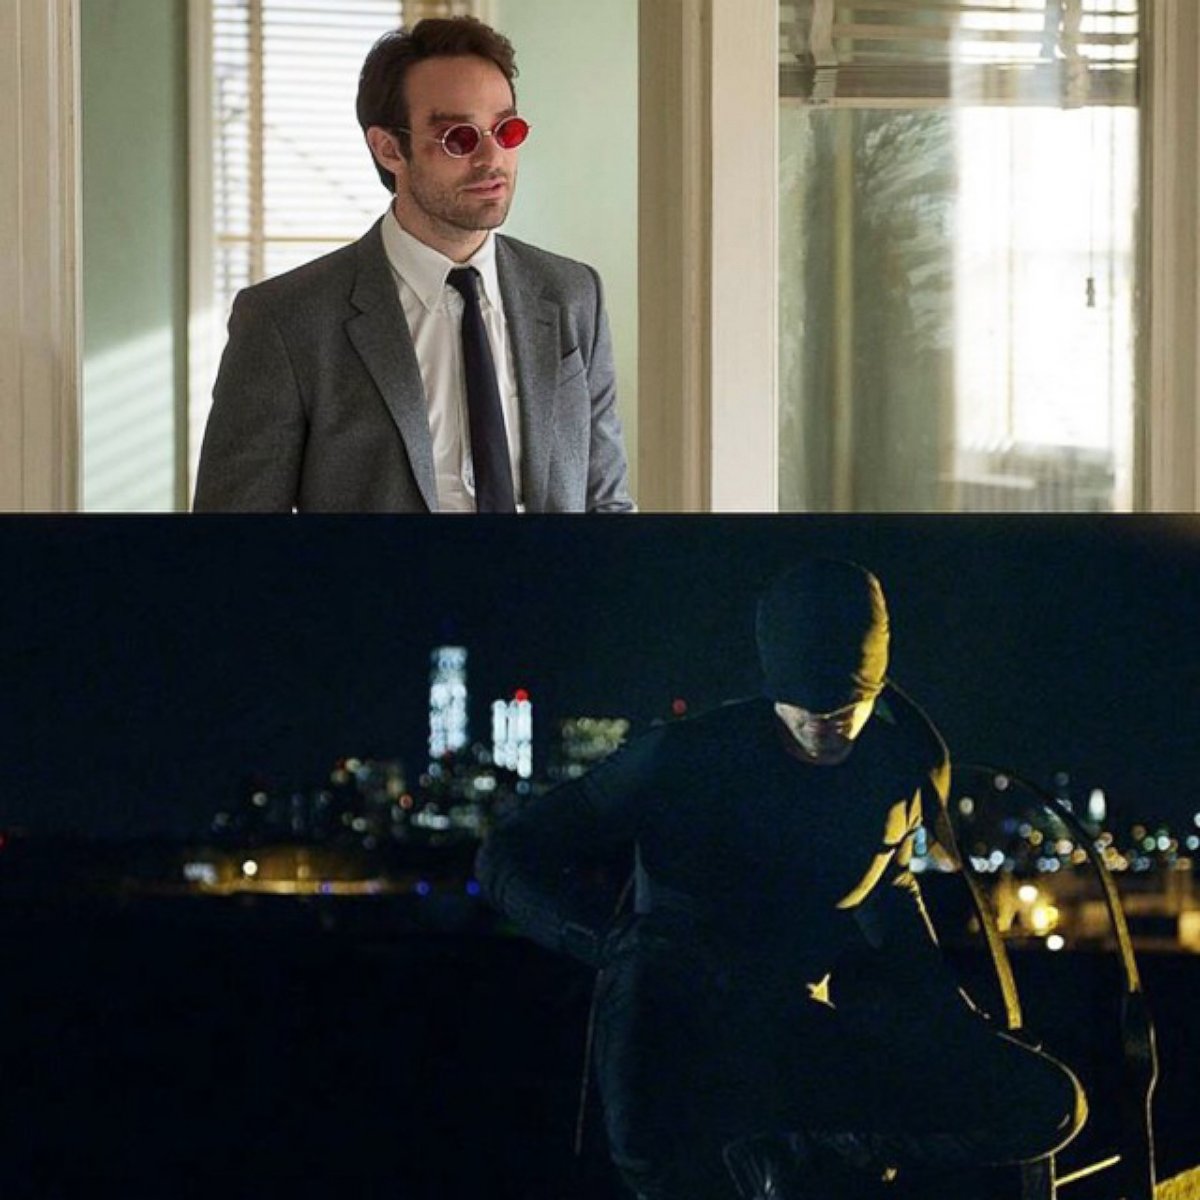 PHOTO: Marvel posted this photo to their Instagram on Oct. 11, 2014 with the caption, "You're looking at the first official photos of Charlie Cox as Matt Murdock in #Marvel's #Daredevil, coming to@Netflix."